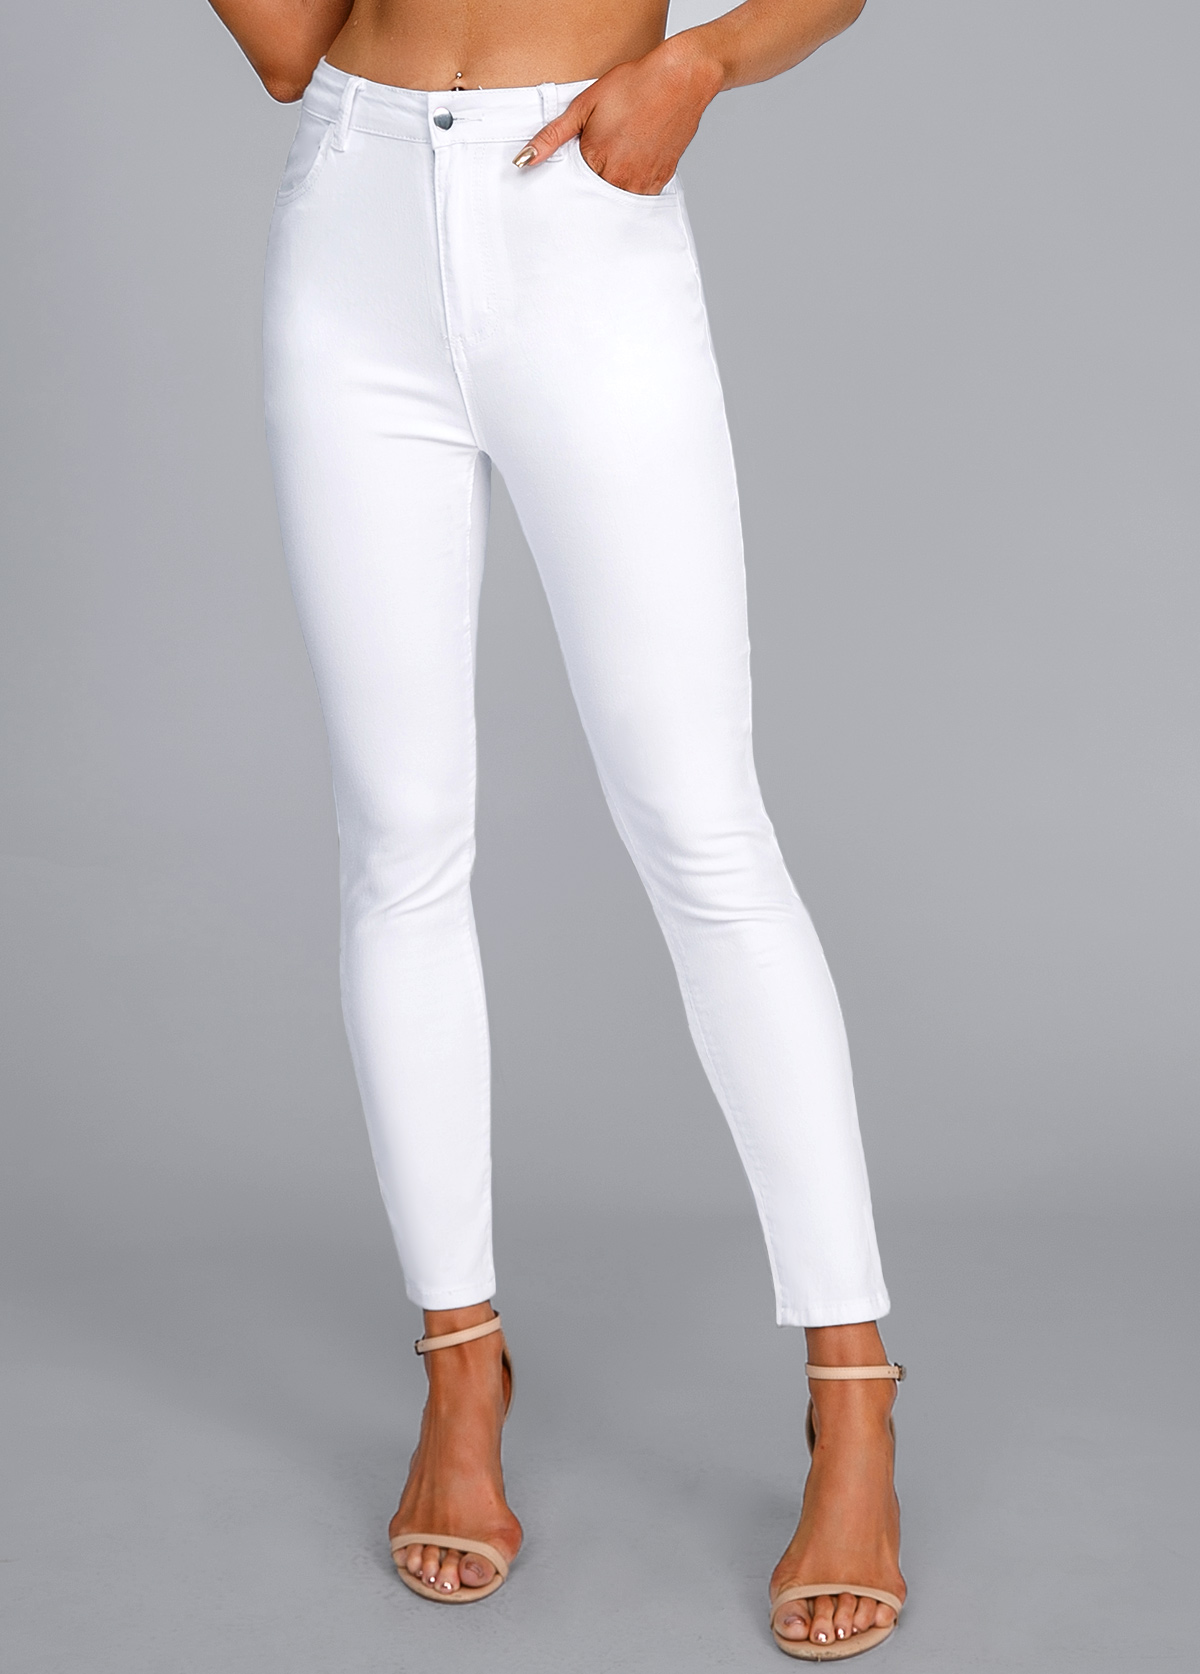 White High Waisted Button Fly Leggings